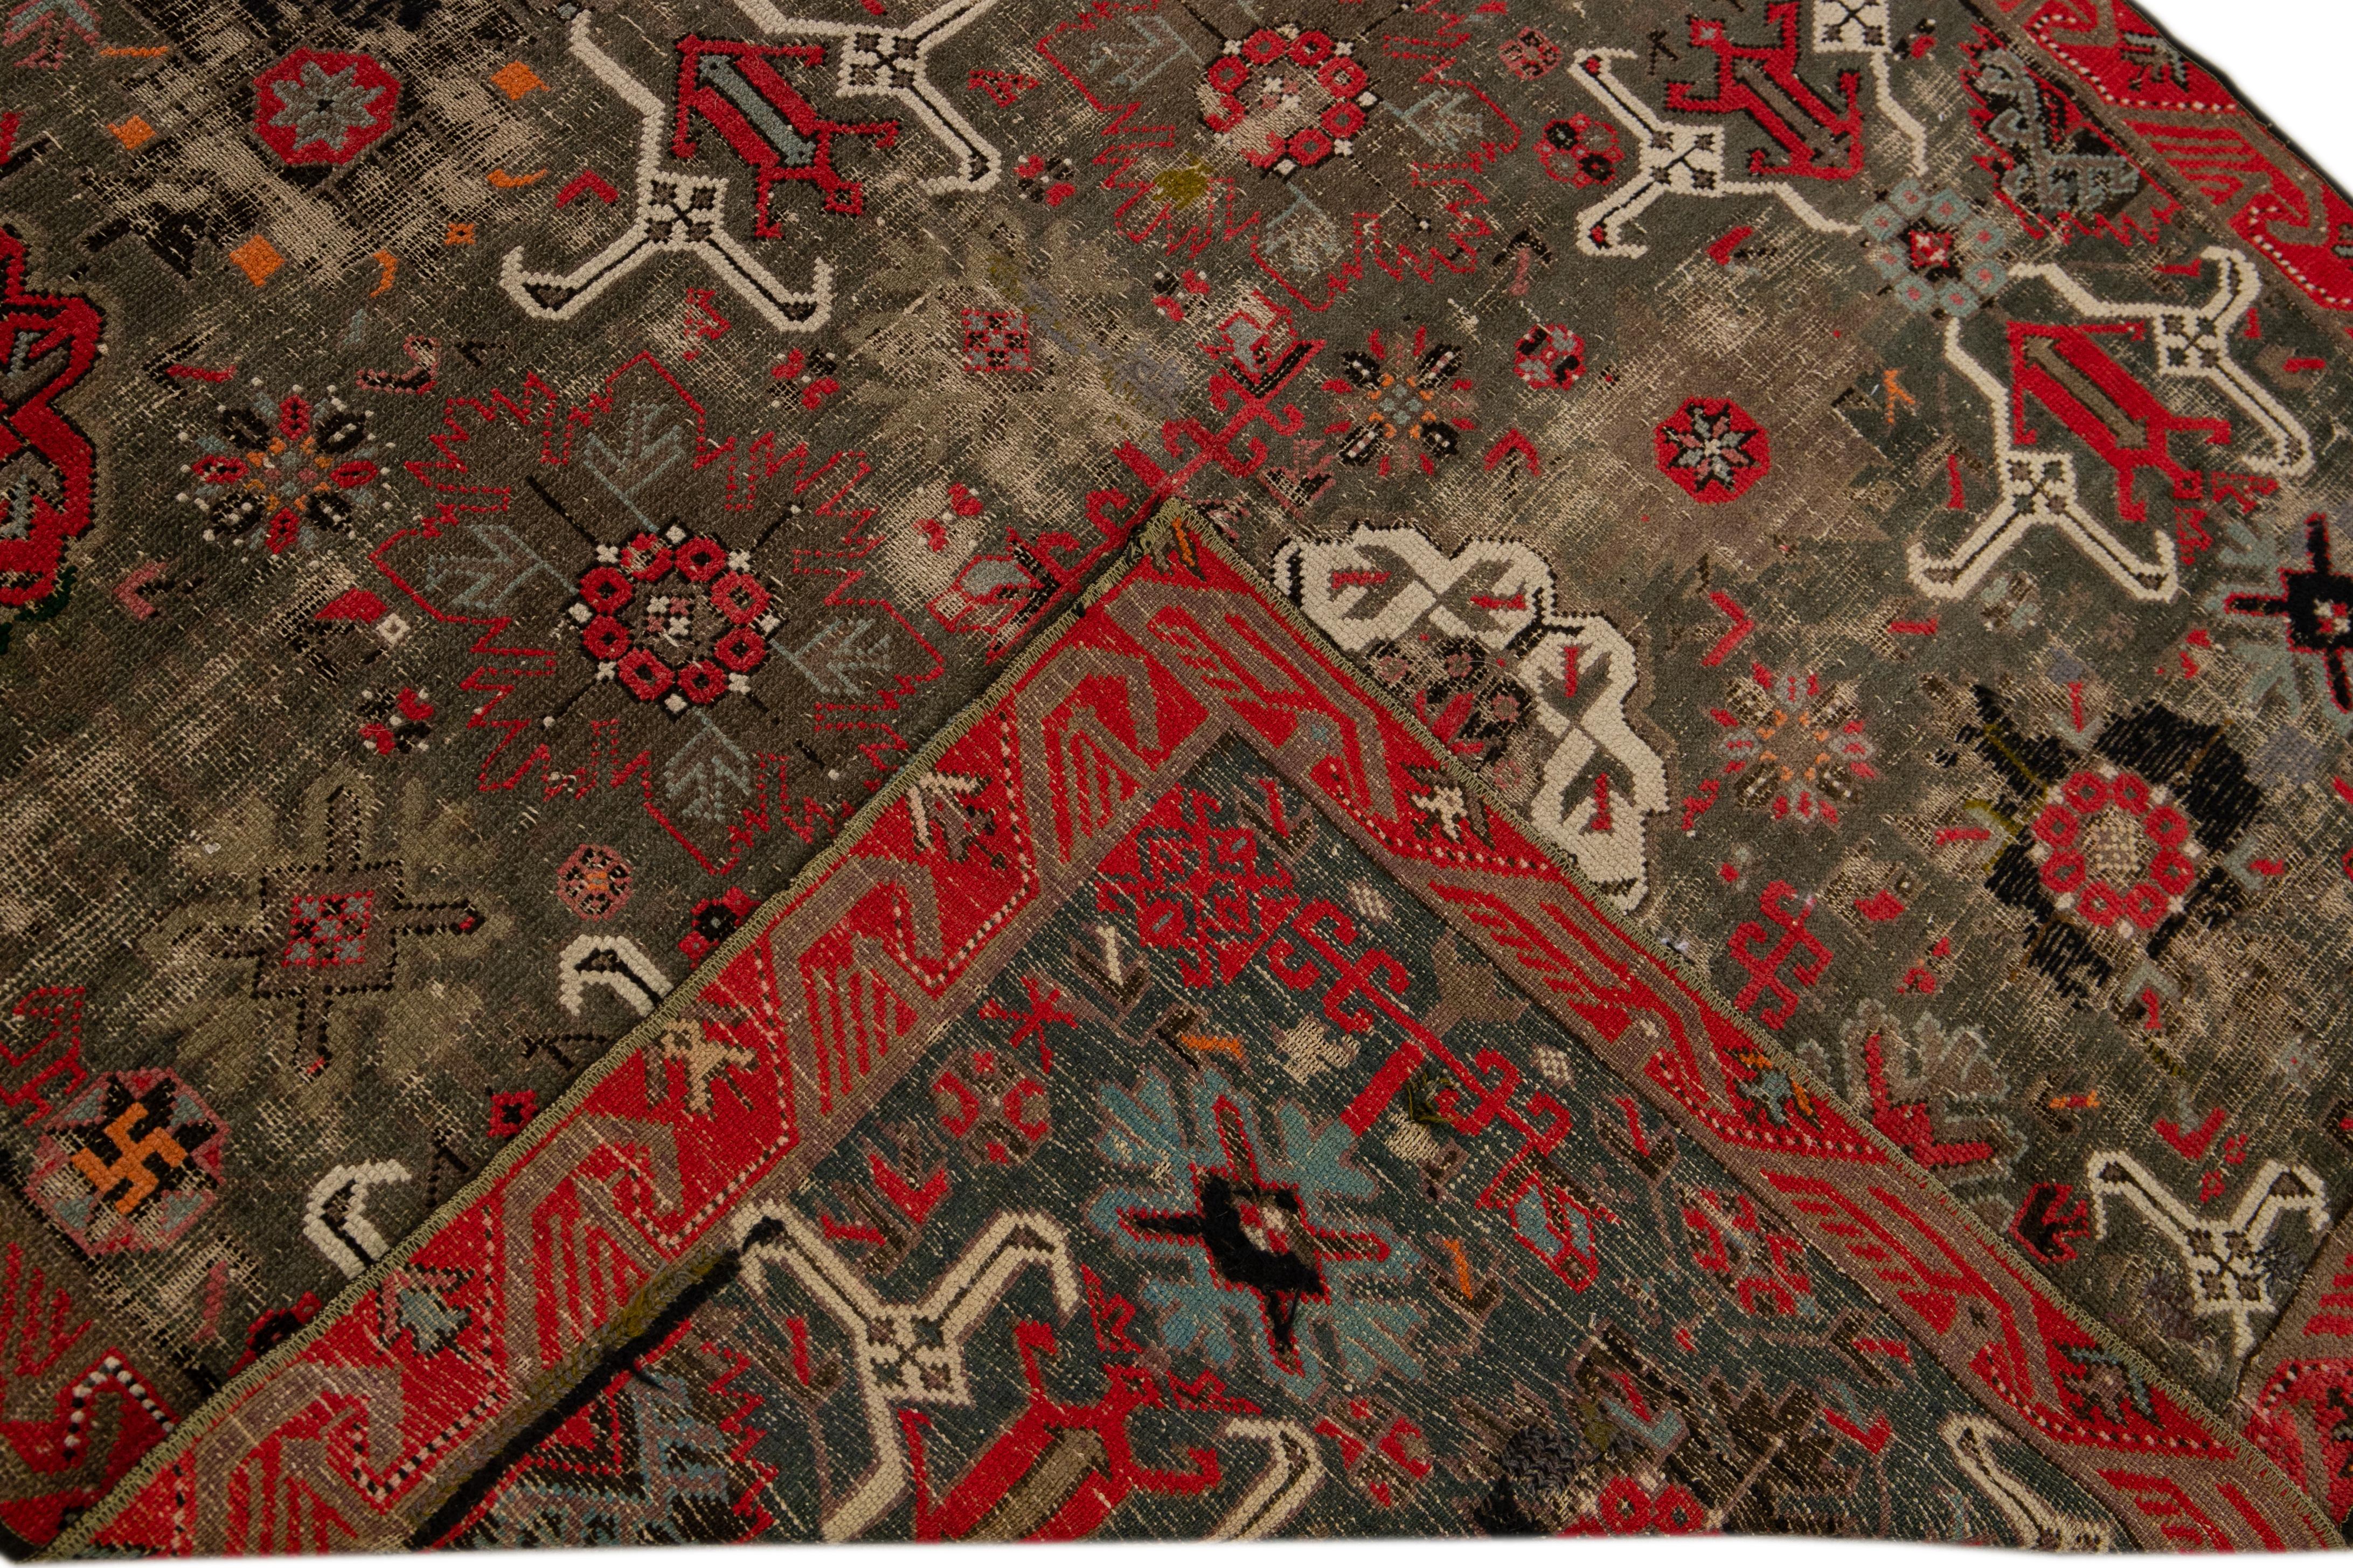 Beautiful antique Malayer hand-knotted wool rug with a brown field. This Malayer rug has an orange, red, beige, and blue accent in an all-over gorgeous floral pattern design.

This rug measures: 4'4